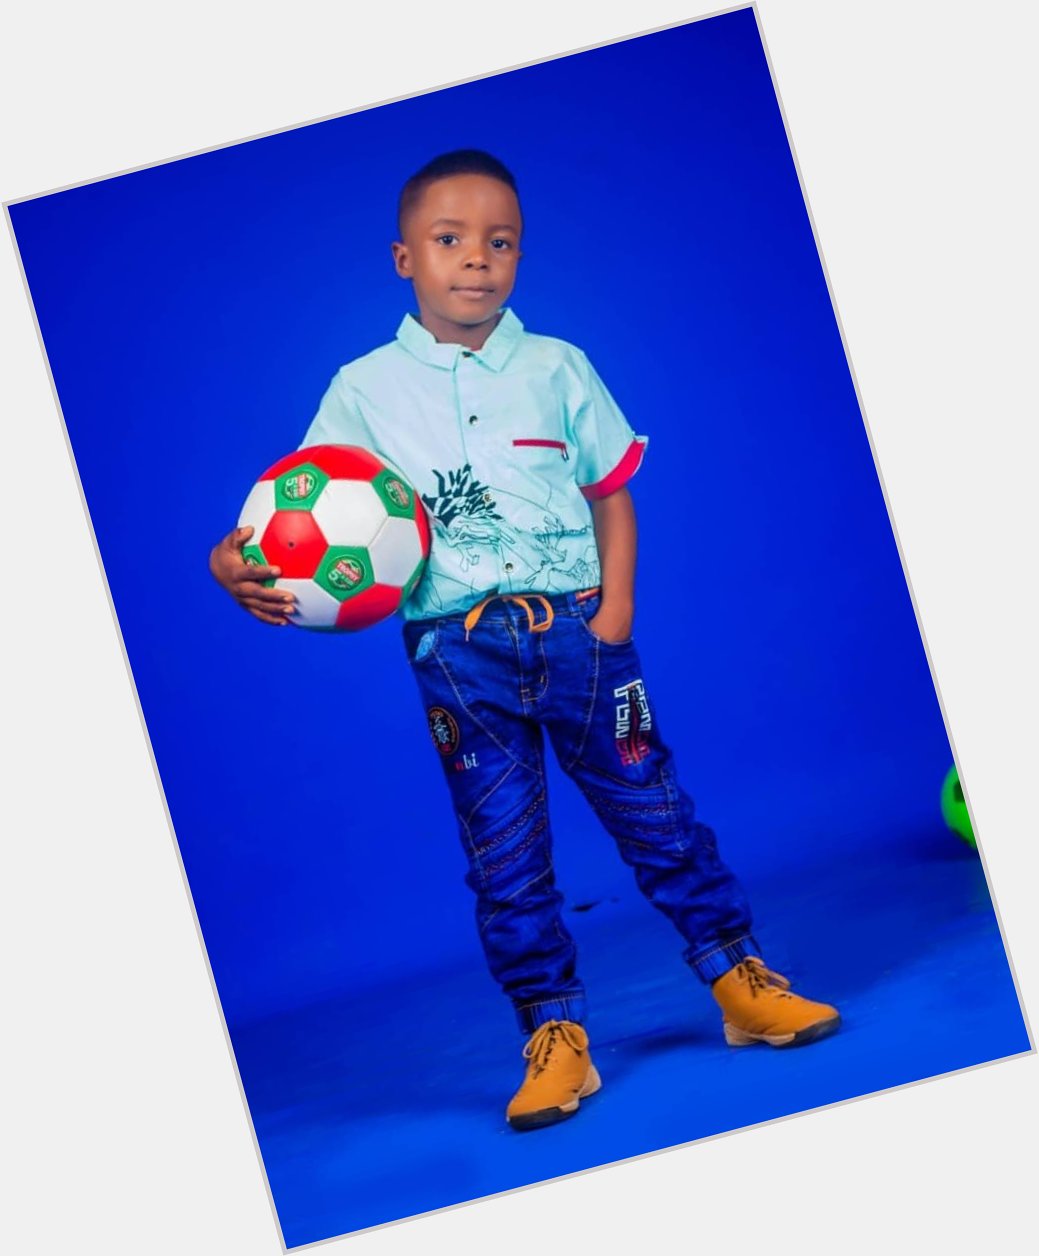 Happy birthday my prince charming......you bless in Jesus name 